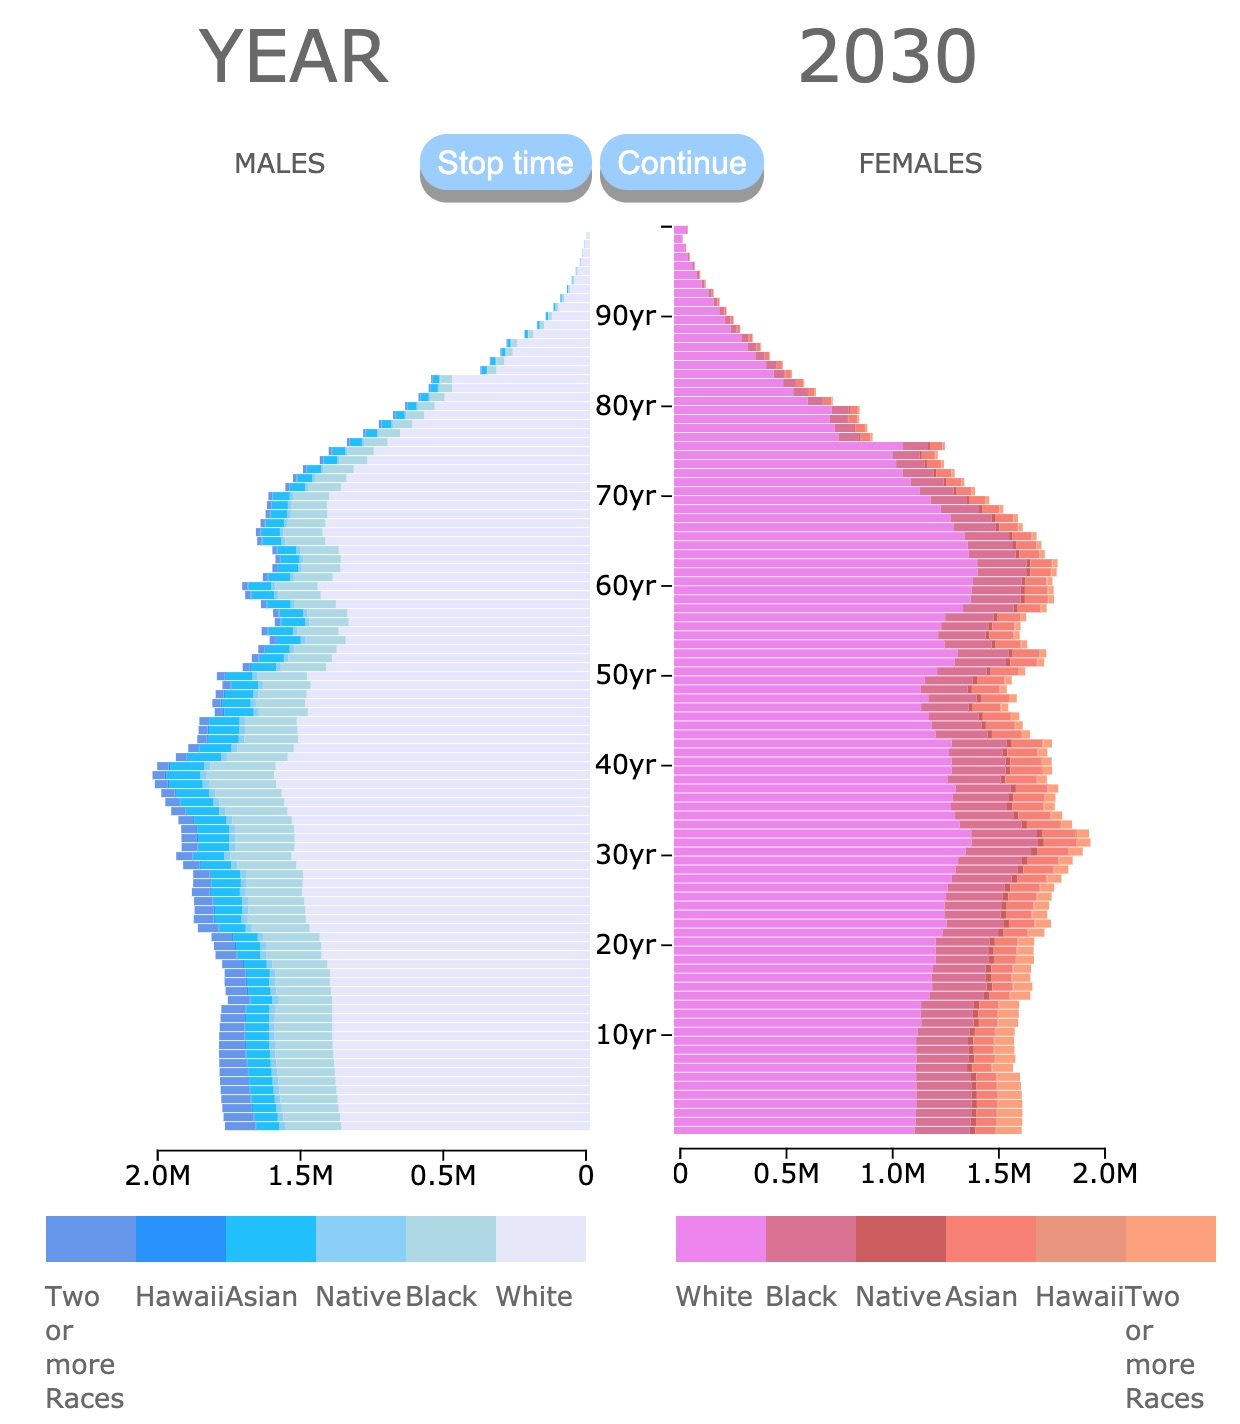 population pyramid by ethnicity in the USA